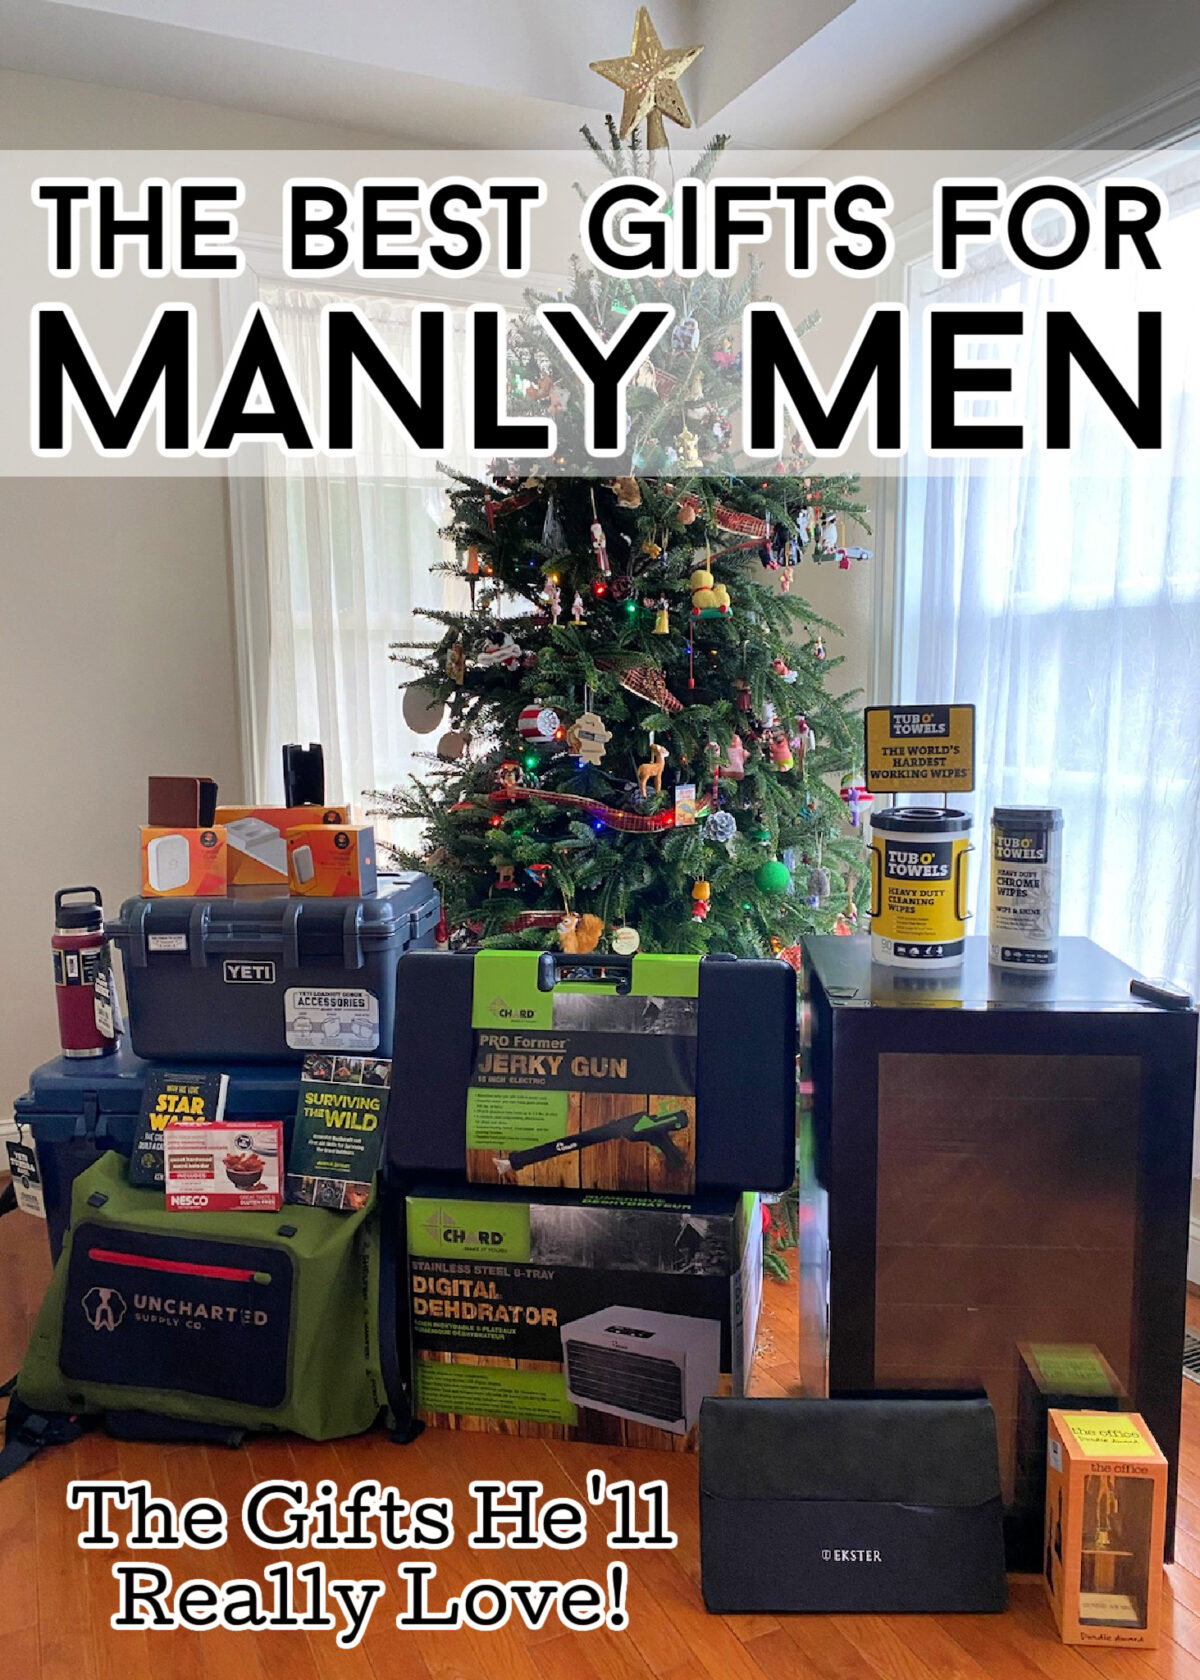 The Best Gifts for Manly Men